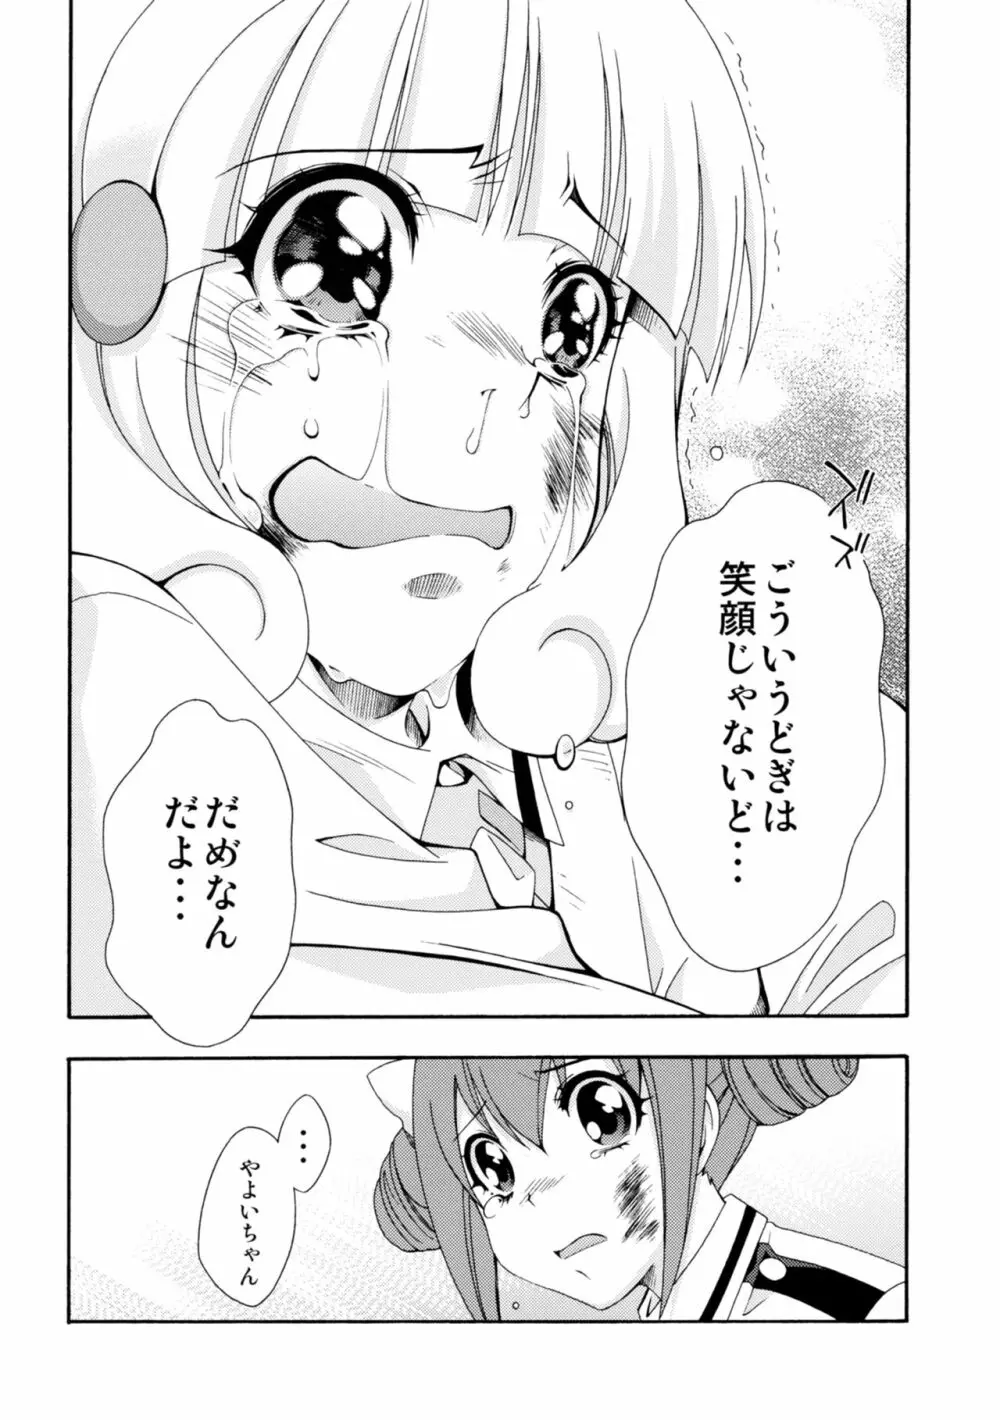 SMILES AND TEARS Vol.02 56ページ